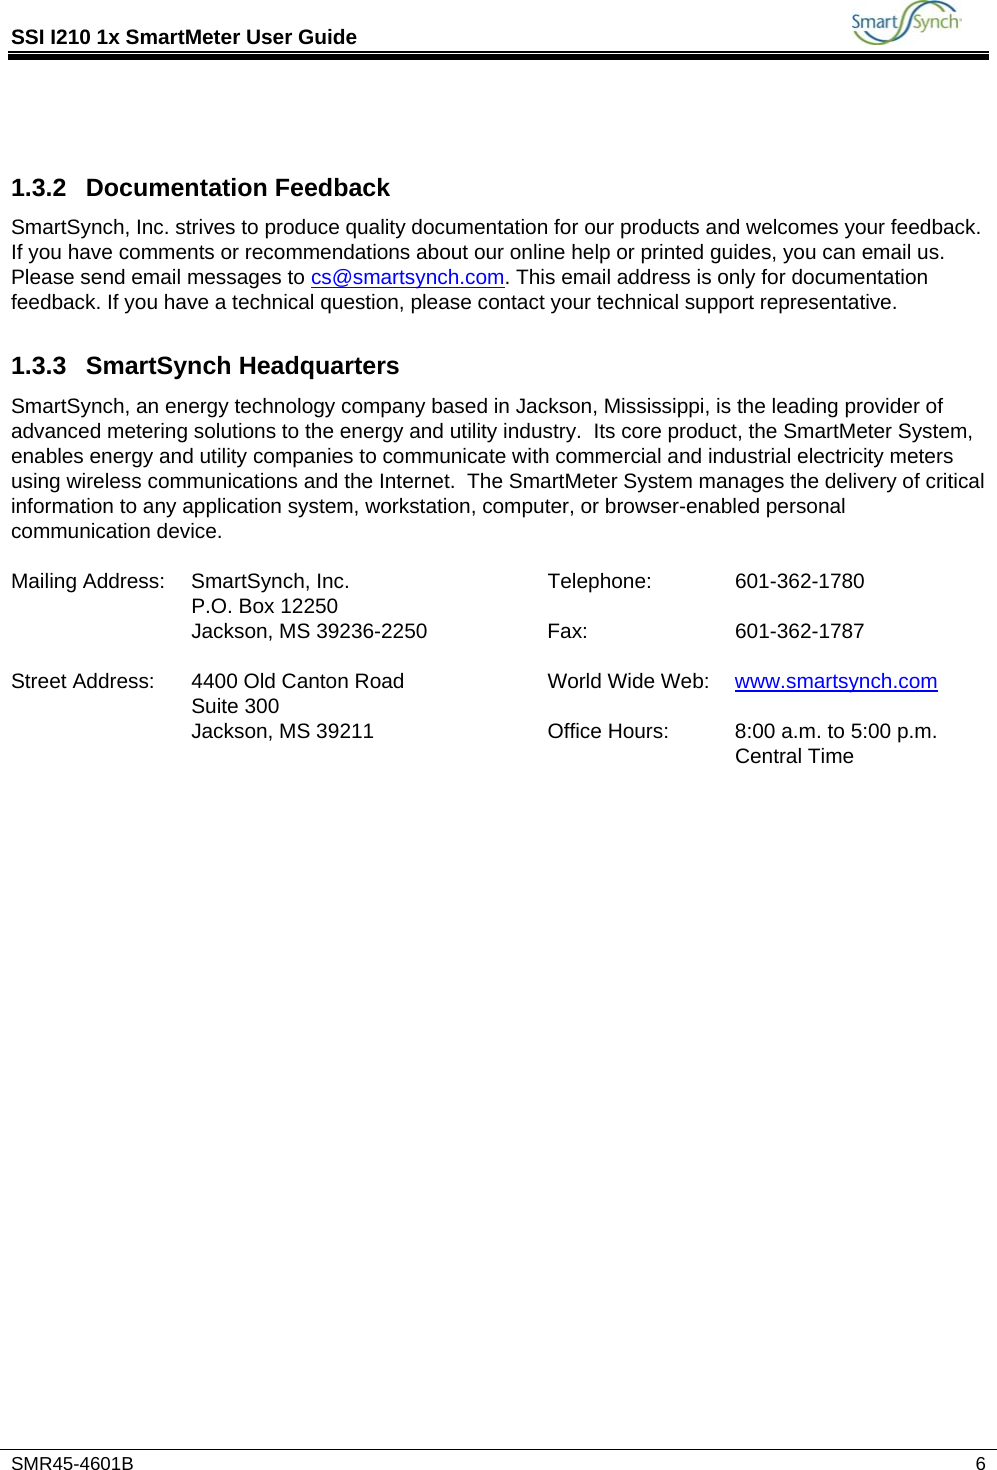 SSI I210 1x SmartMeter User Guide           SMR45-4601B   6   1.3.2 Documentation Feedback SmartSynch, Inc. strives to produce quality documentation for our products and welcomes your feedback. If you have comments or recommendations about our online help or printed guides, you can email us. Please send email messages to cs@smartsynch.com. This email address is only for documentation feedback. If you have a technical question, please contact your technical support representative. 1.3.3 SmartSynch Headquarters SmartSynch, an energy technology company based in Jackson, Mississippi, is the leading provider of advanced metering solutions to the energy and utility industry.  Its core product, the SmartMeter System, enables energy and utility companies to communicate with commercial and industrial electricity meters using wireless communications and the Internet.  The SmartMeter System manages the delivery of critical information to any application system, workstation, computer, or browser-enabled personal communication device.  Mailing Address:  SmartSynch, Inc.  Telephone:  601-362-1780   P.O. Box 12250       Jackson, MS 39236-2250  Fax:  601-362-1787       Street Address:  4400 Old Canton Road  World Wide Web:  www.smartsynch.com  Suite 300       Jackson, MS 39211  Office Hours:  8:00 a.m. to 5:00 p.m. Central Time  